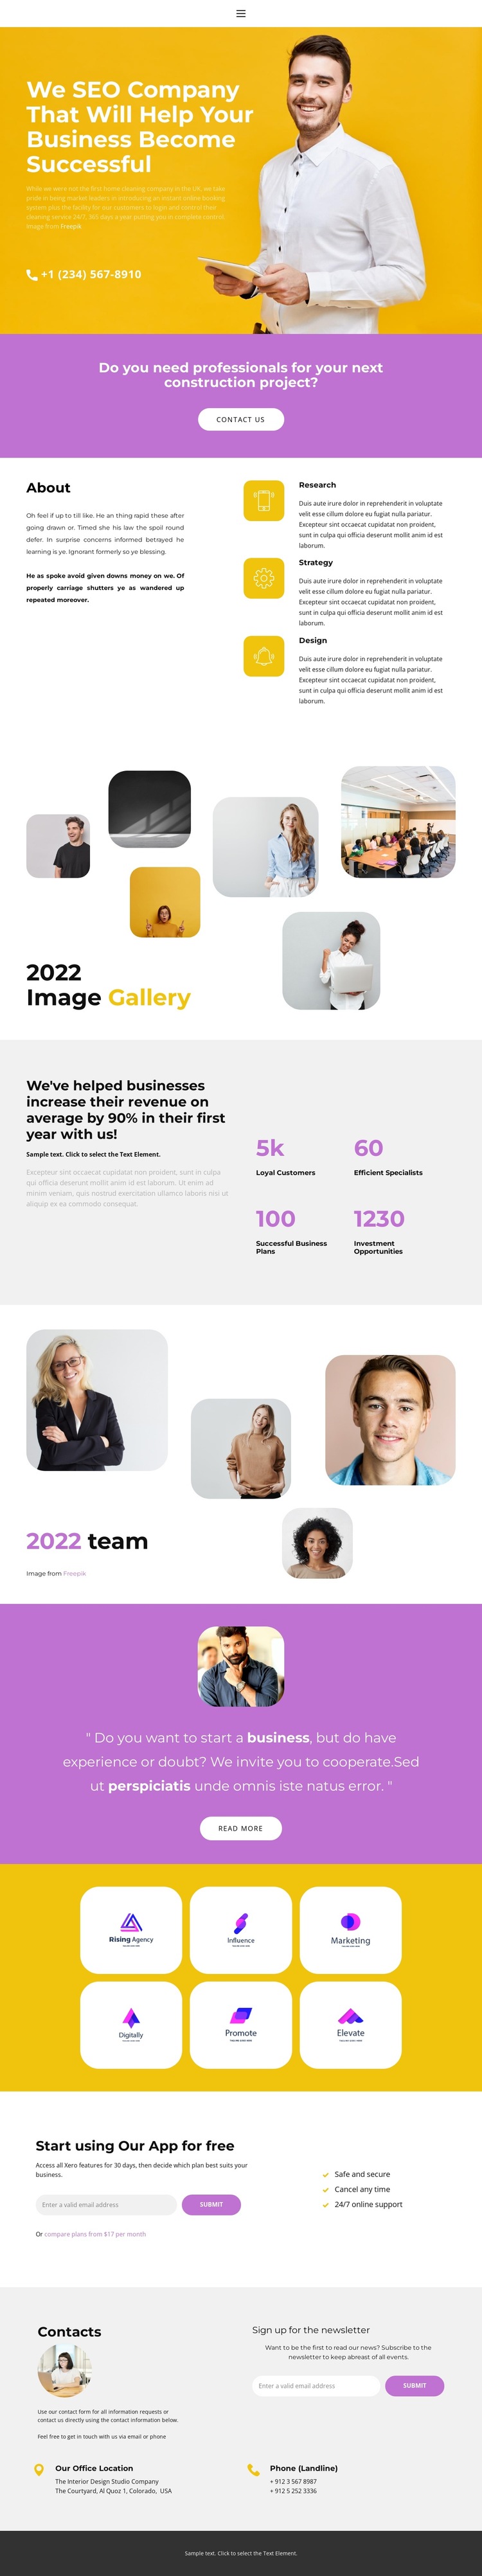 Mission and purpose HTML5 Template